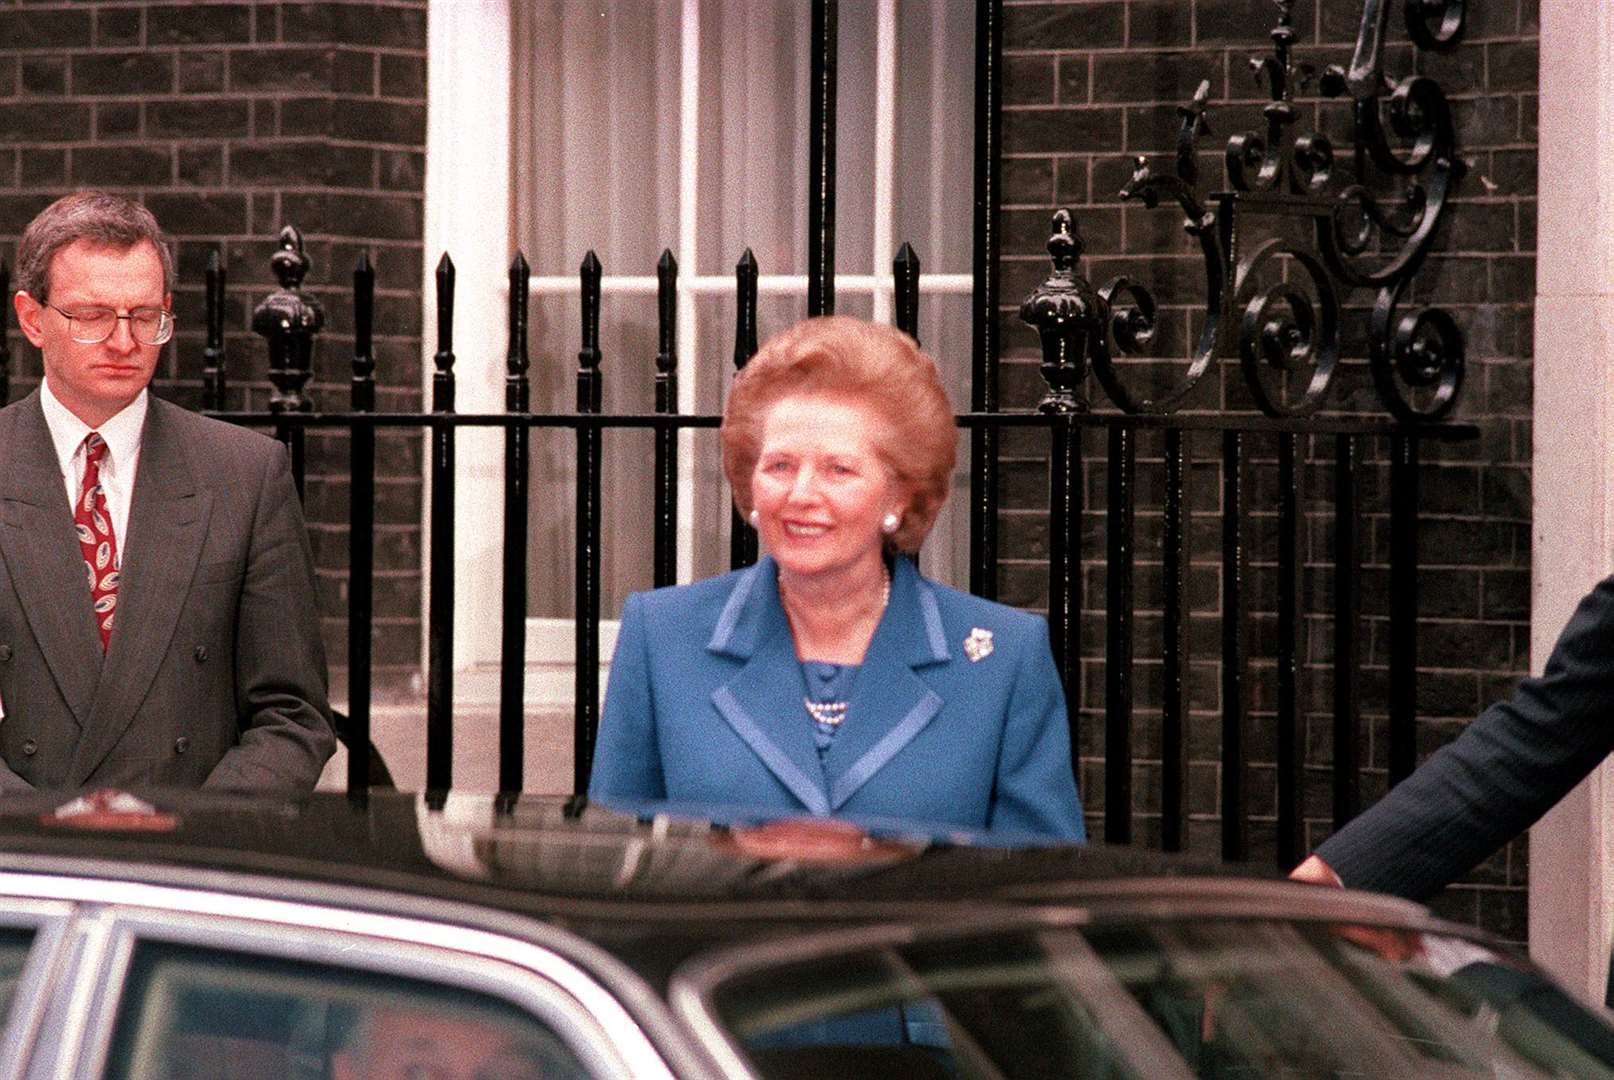 PM Margaret Thatcher on the day of her resignation in 1990 after 11 years in power (PA)